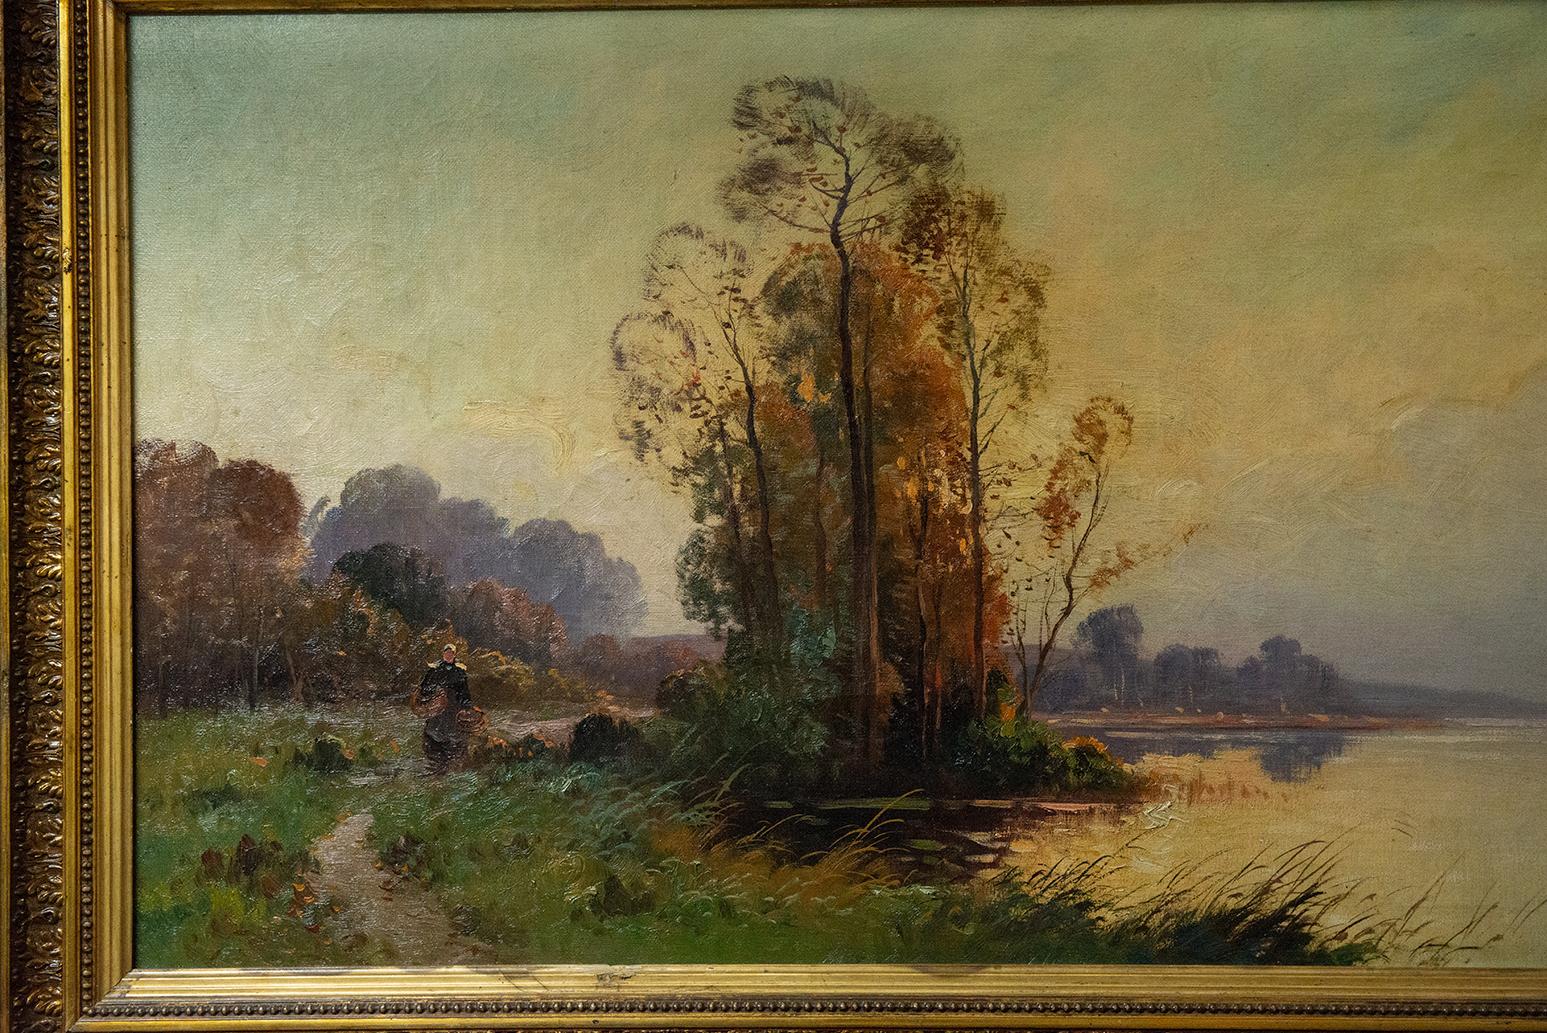 Pleasant river landscape with trees and boat: quiet atmosphere, to be transferred home. - Signed: Vernon.-
With the old frame You can also make a mirror.
O/7020.